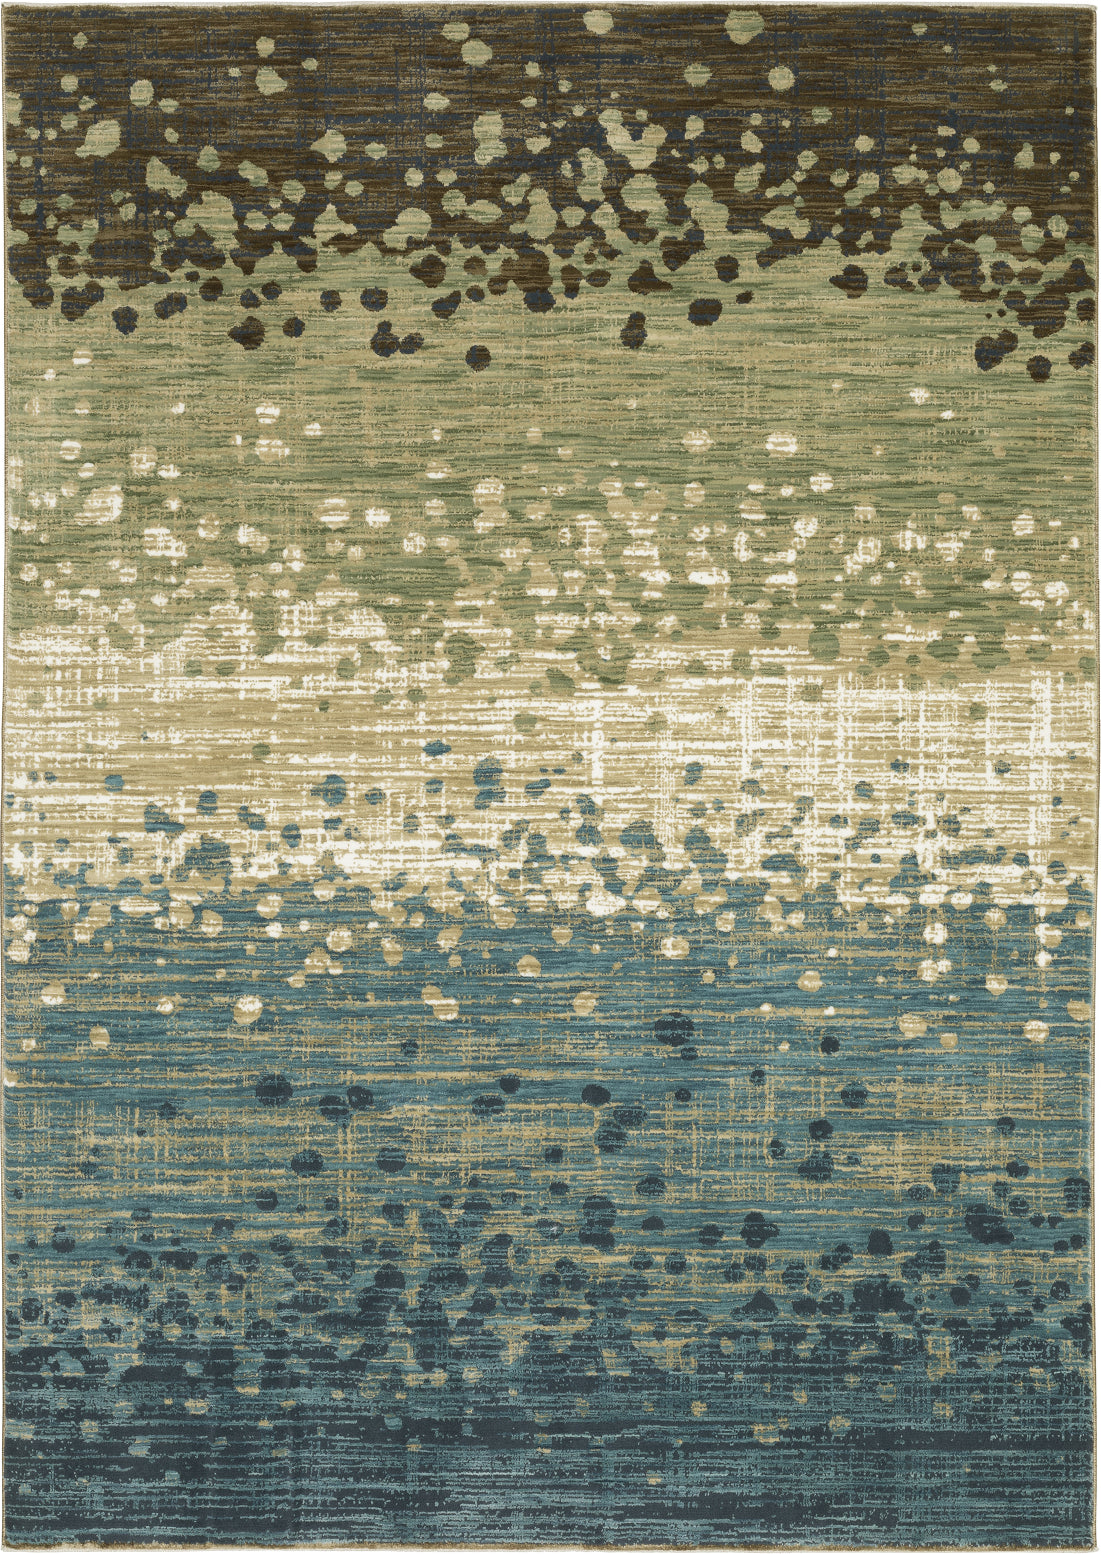 Oriental Weavers Reed RE08A Blue/Green Area Rug main image